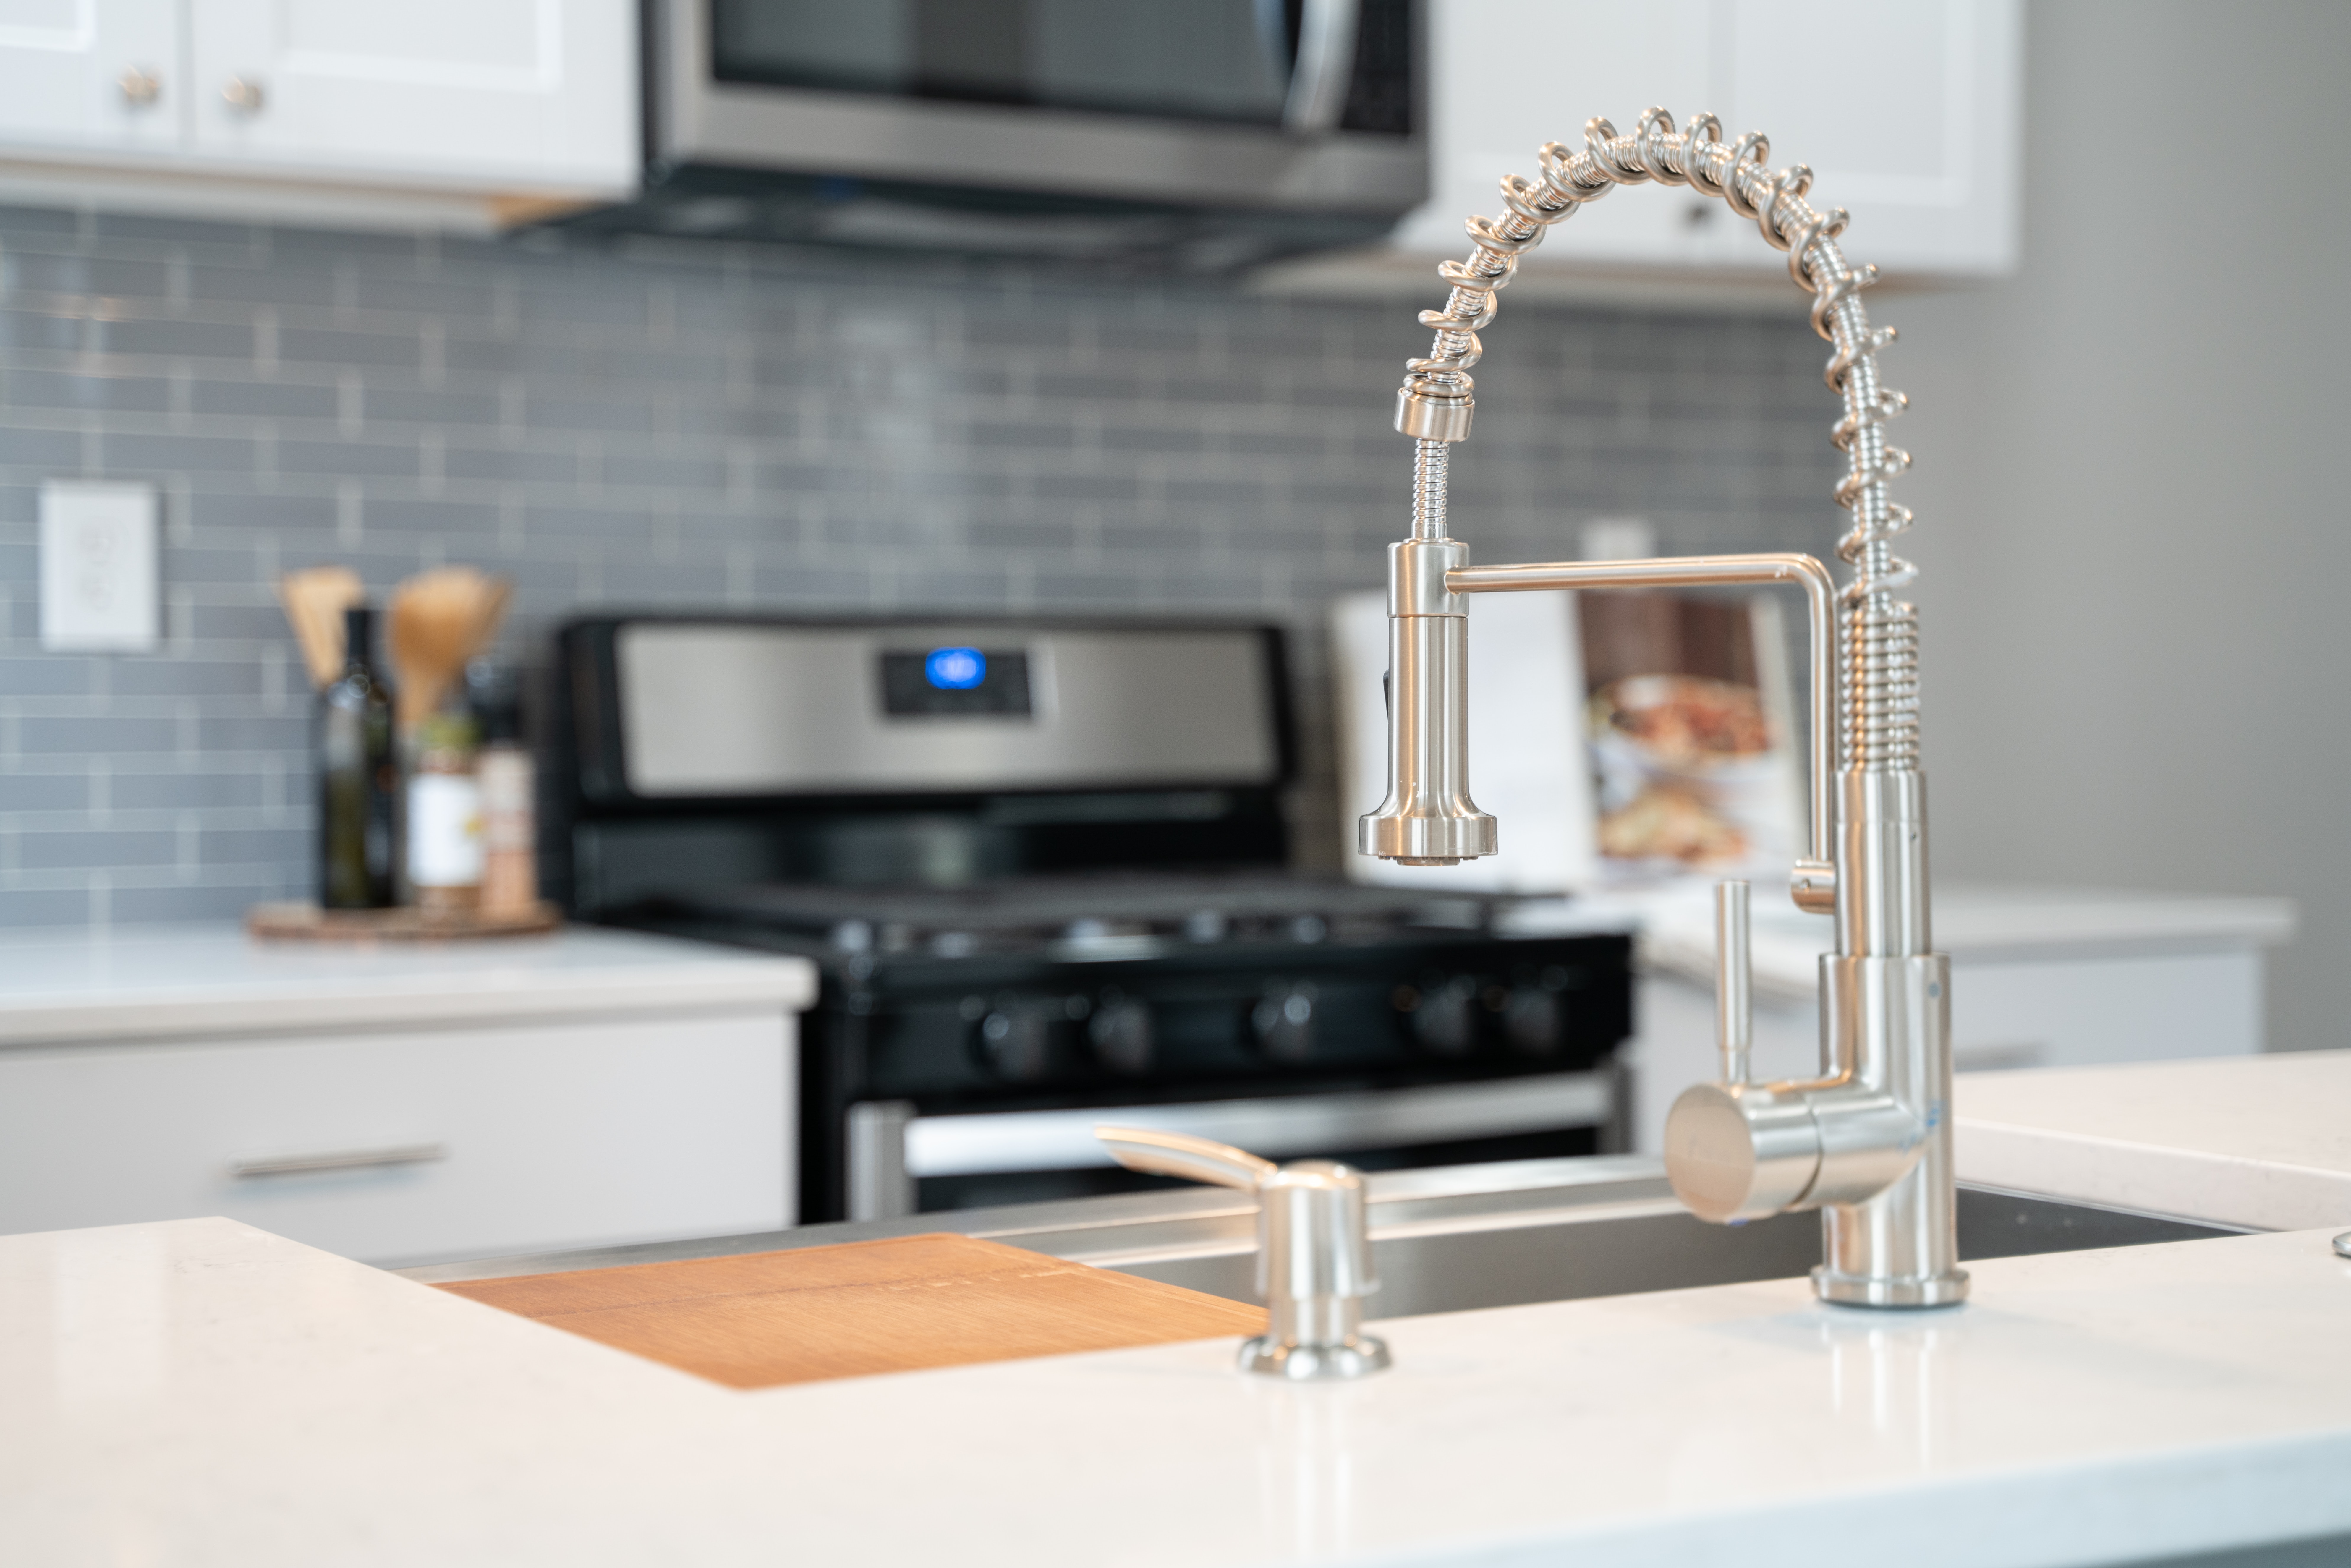 Going with the craze for a black kitchen faucet